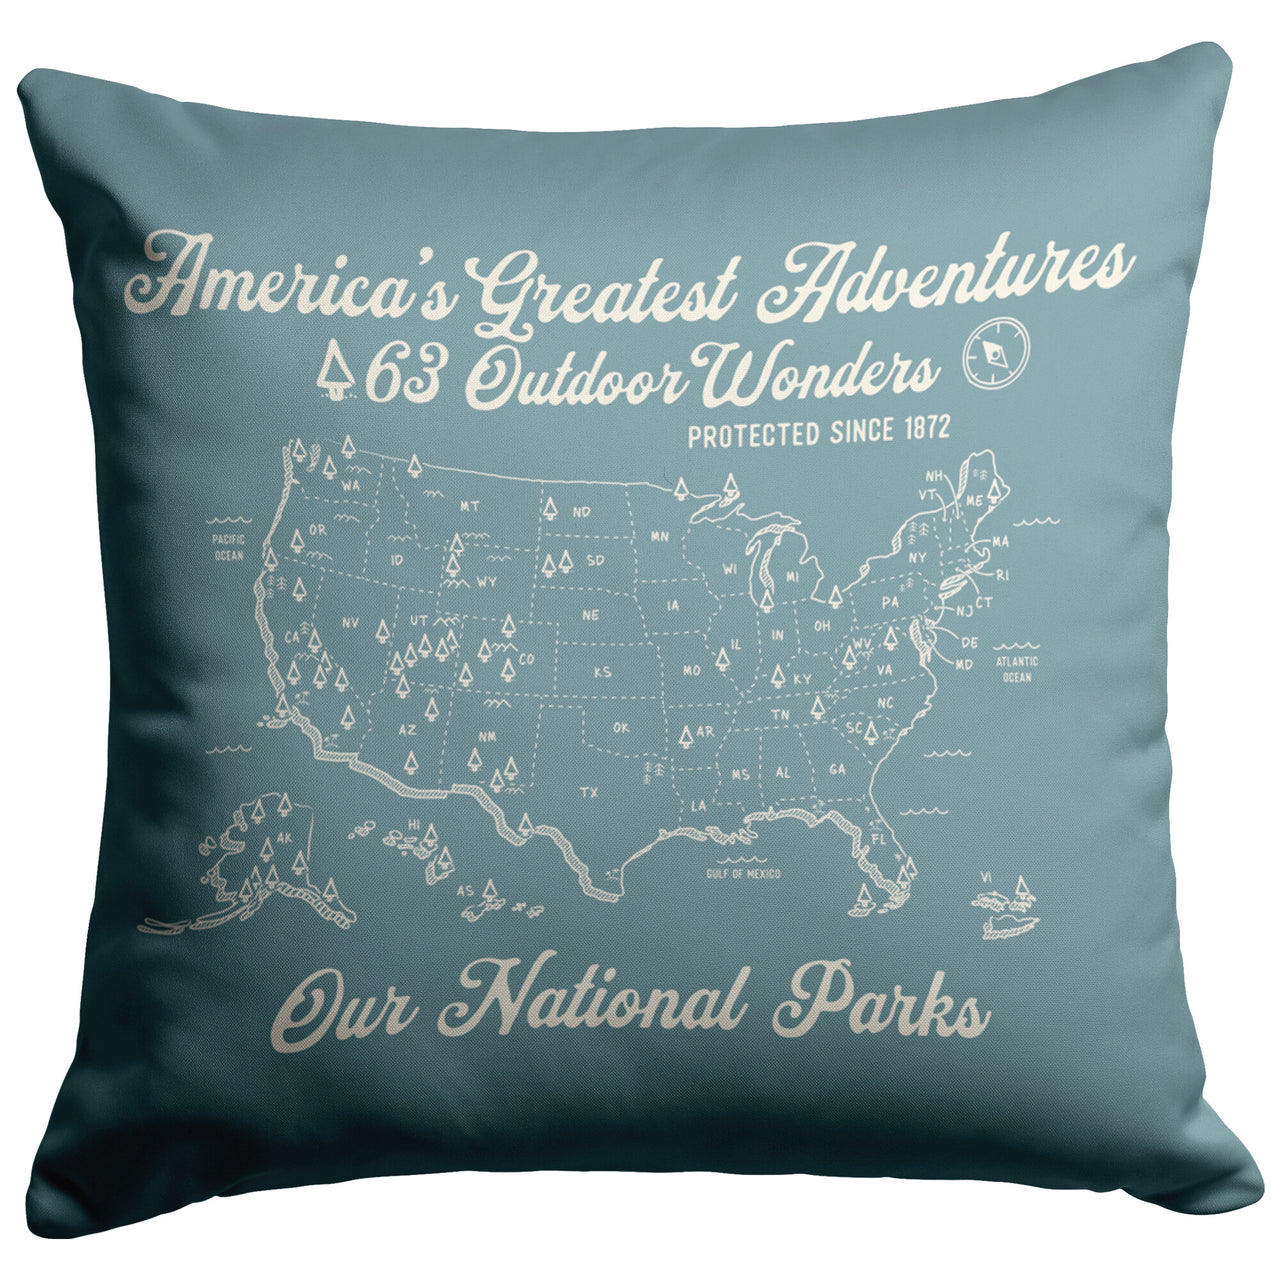 National Parks - America's Greatest Adventures (Weathered Sea Blue)